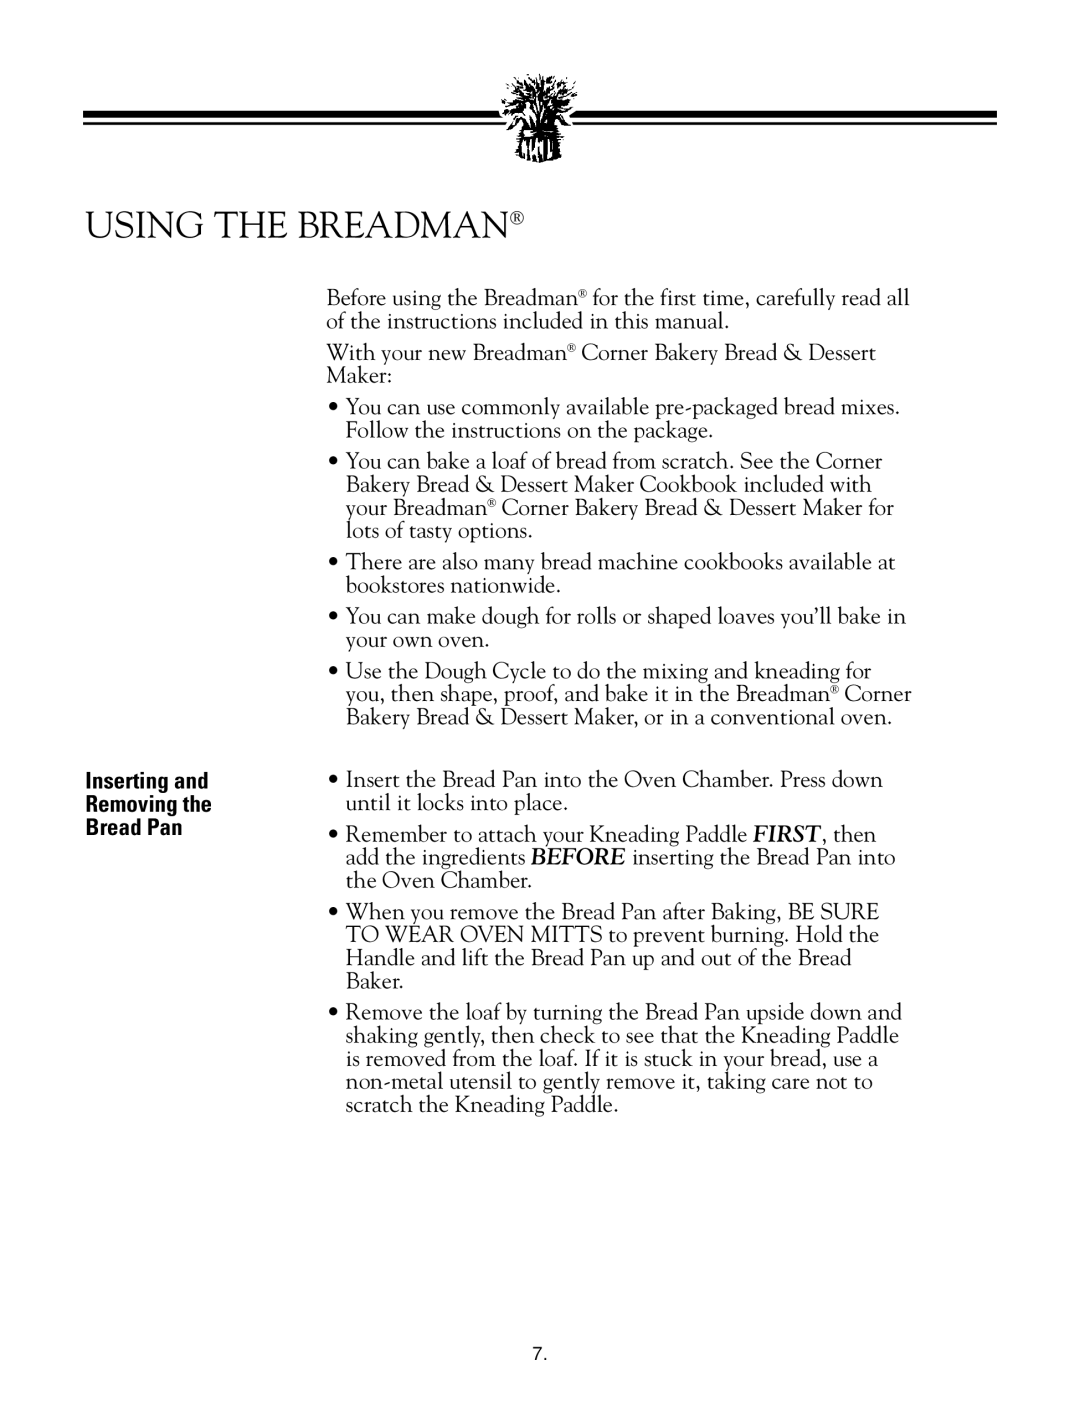 Breadman TR888 instruction manual Using The Breadman, Inserting and Removing the Bread Pan 